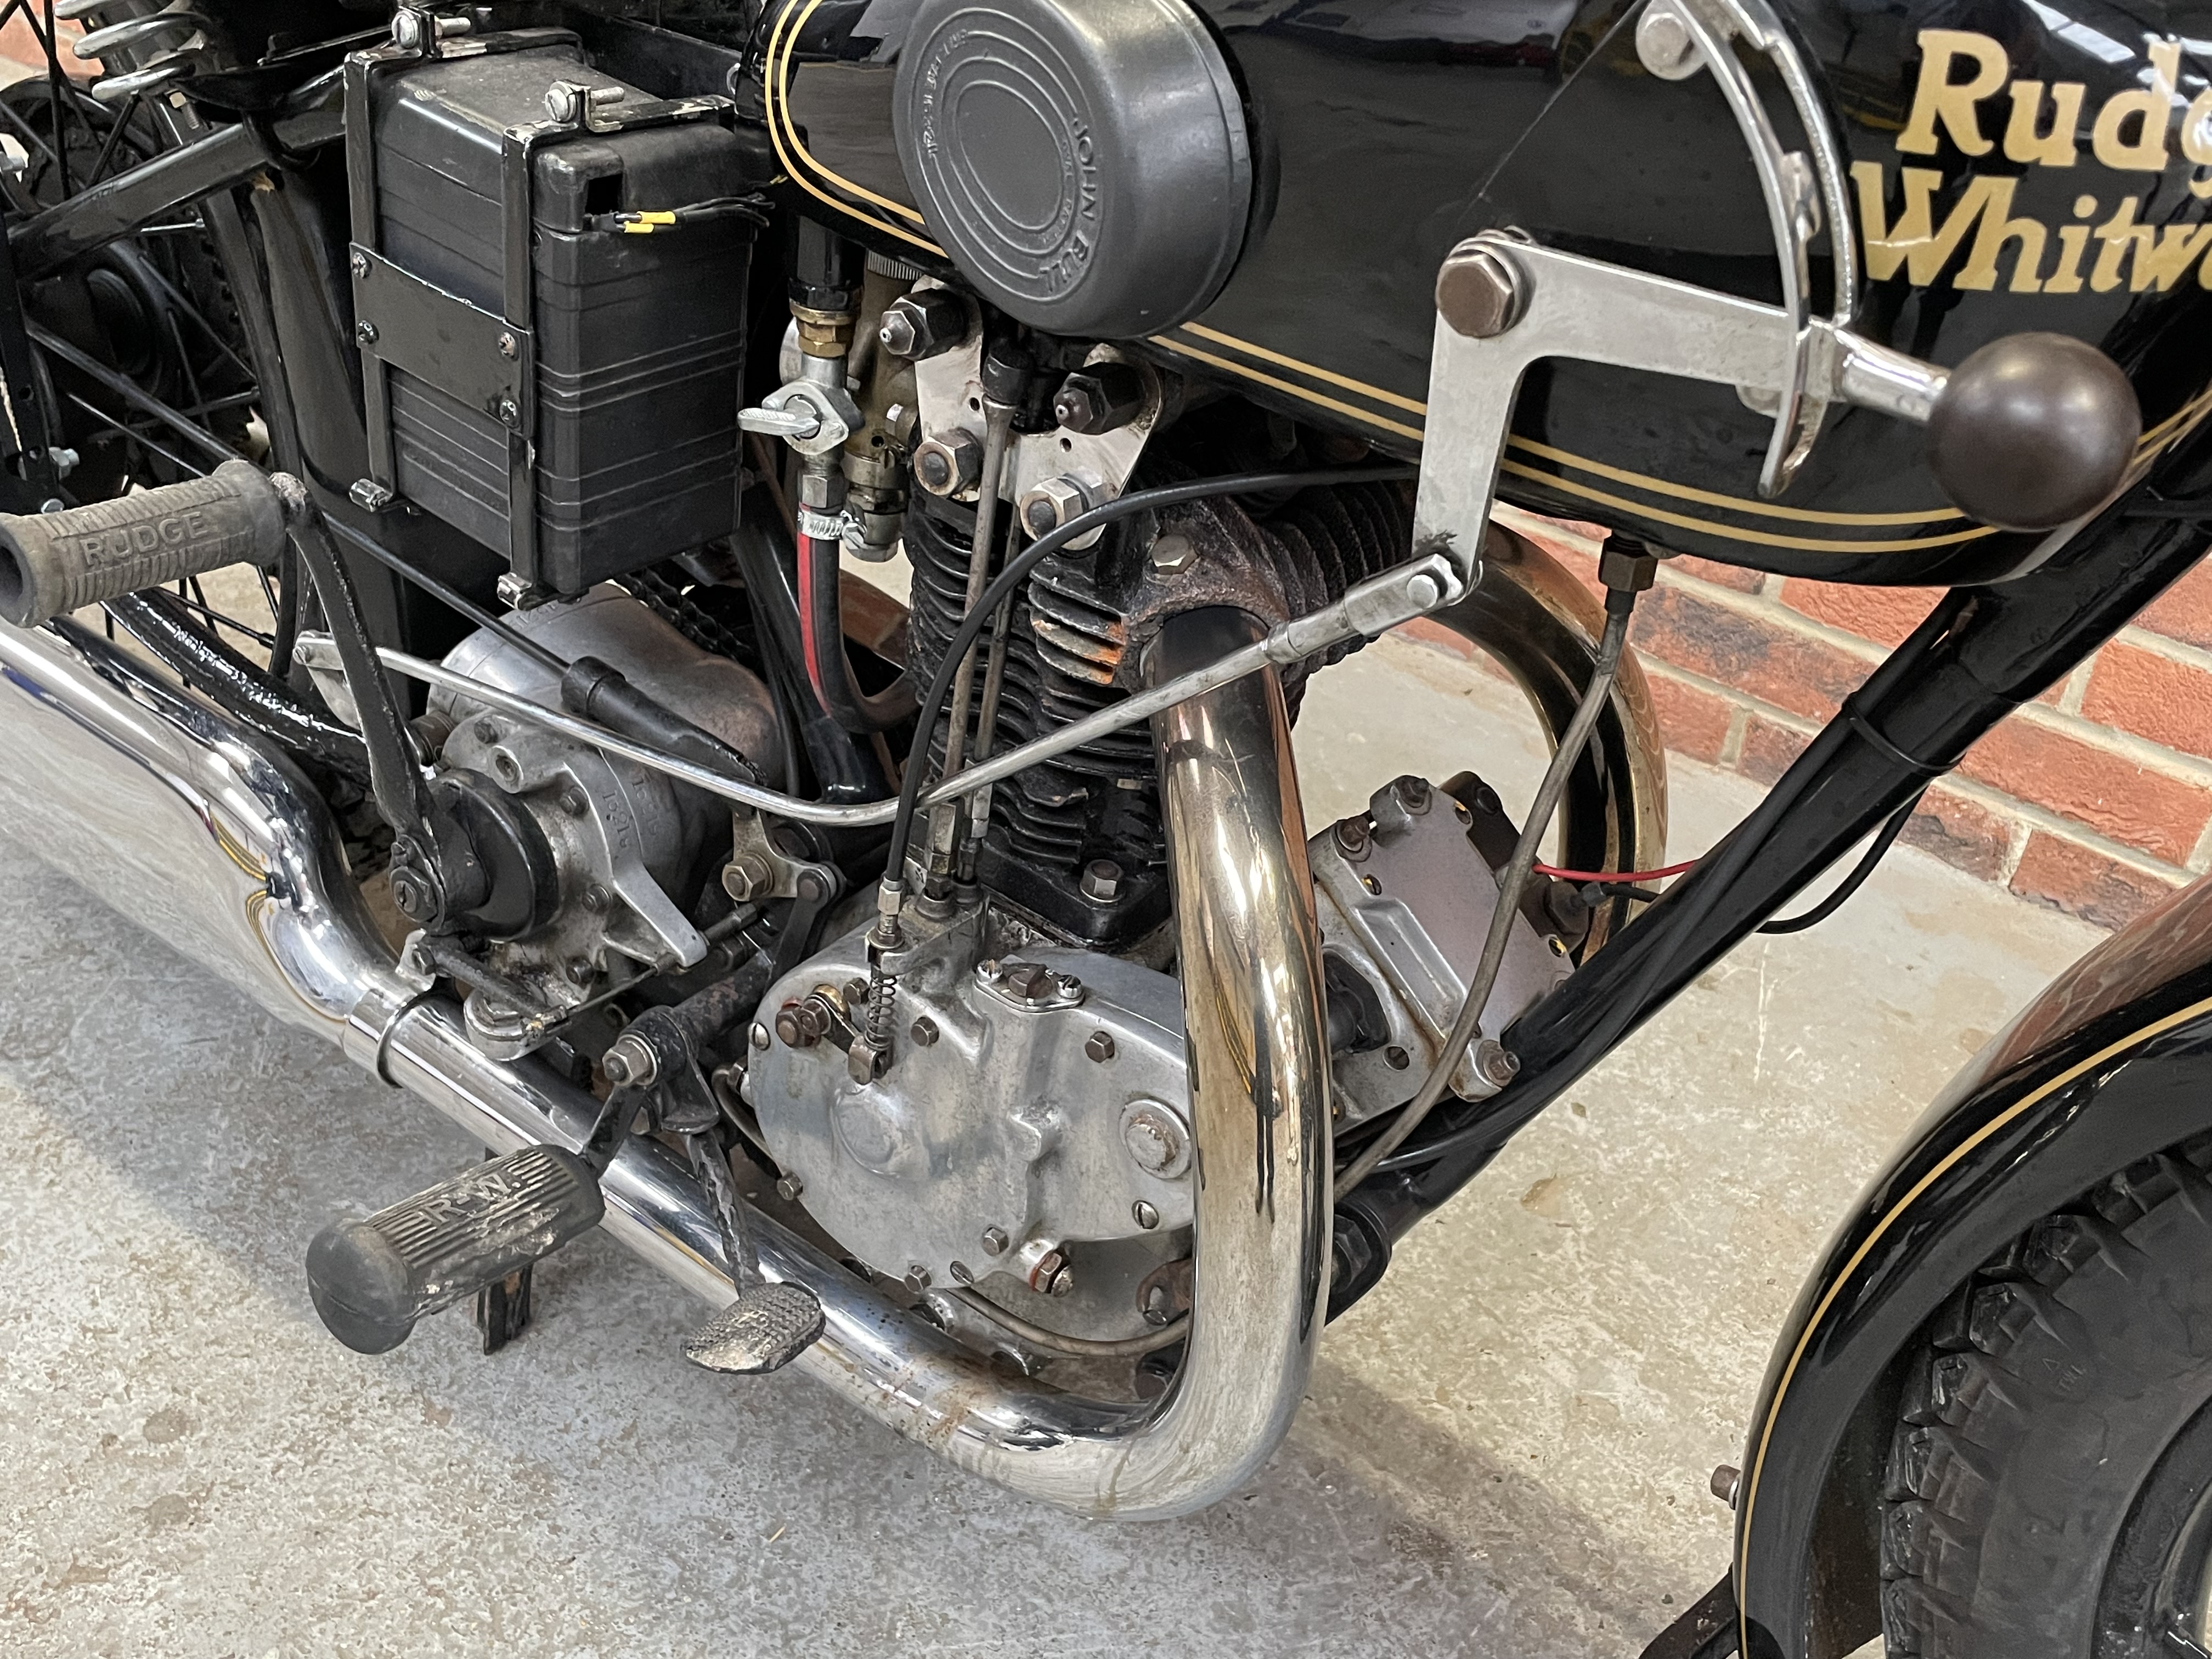 1929 Rudge-Whitworth Special - Image 4 of 12